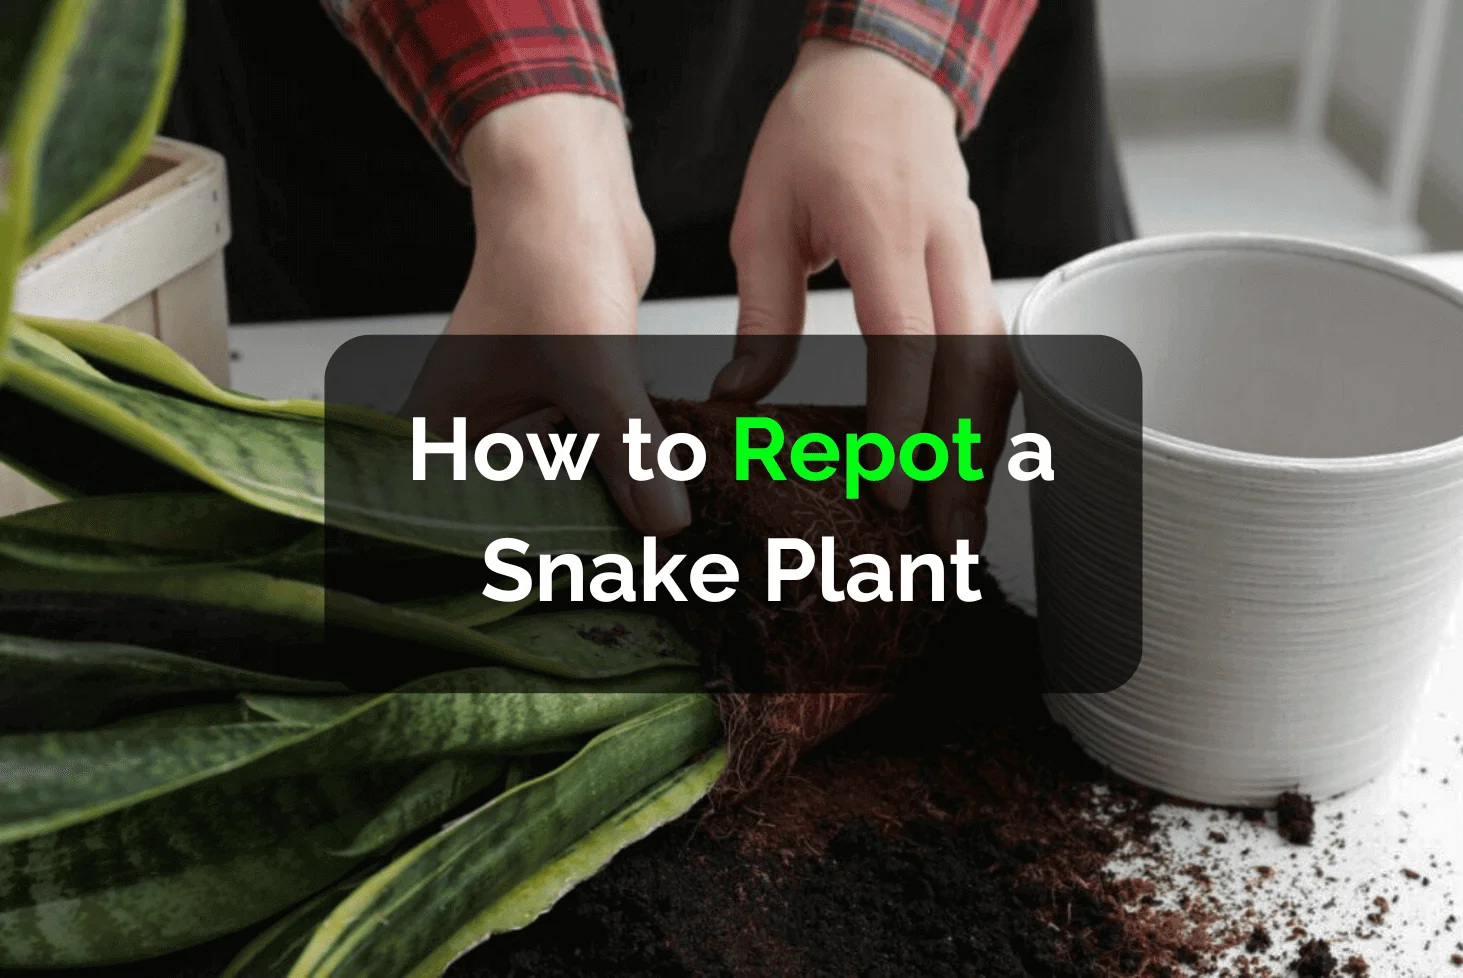 How to Repot a Snake Plant